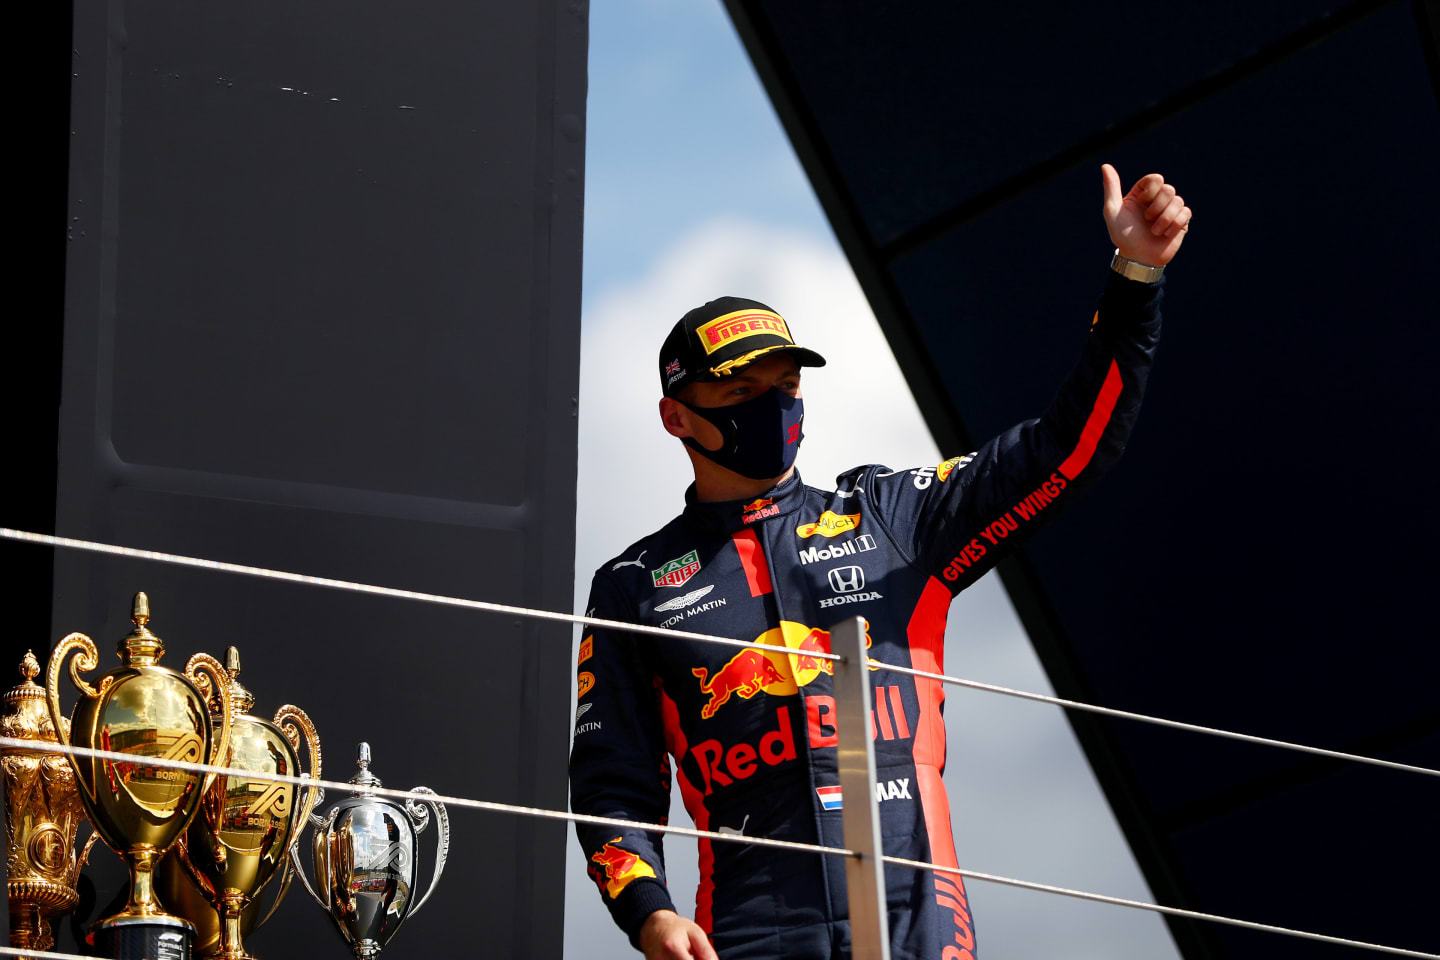 NORTHAMPTON, ENGLAND - AUGUST 02: Max Verstappen of Netherlands and Red Bull Racing celebrates on